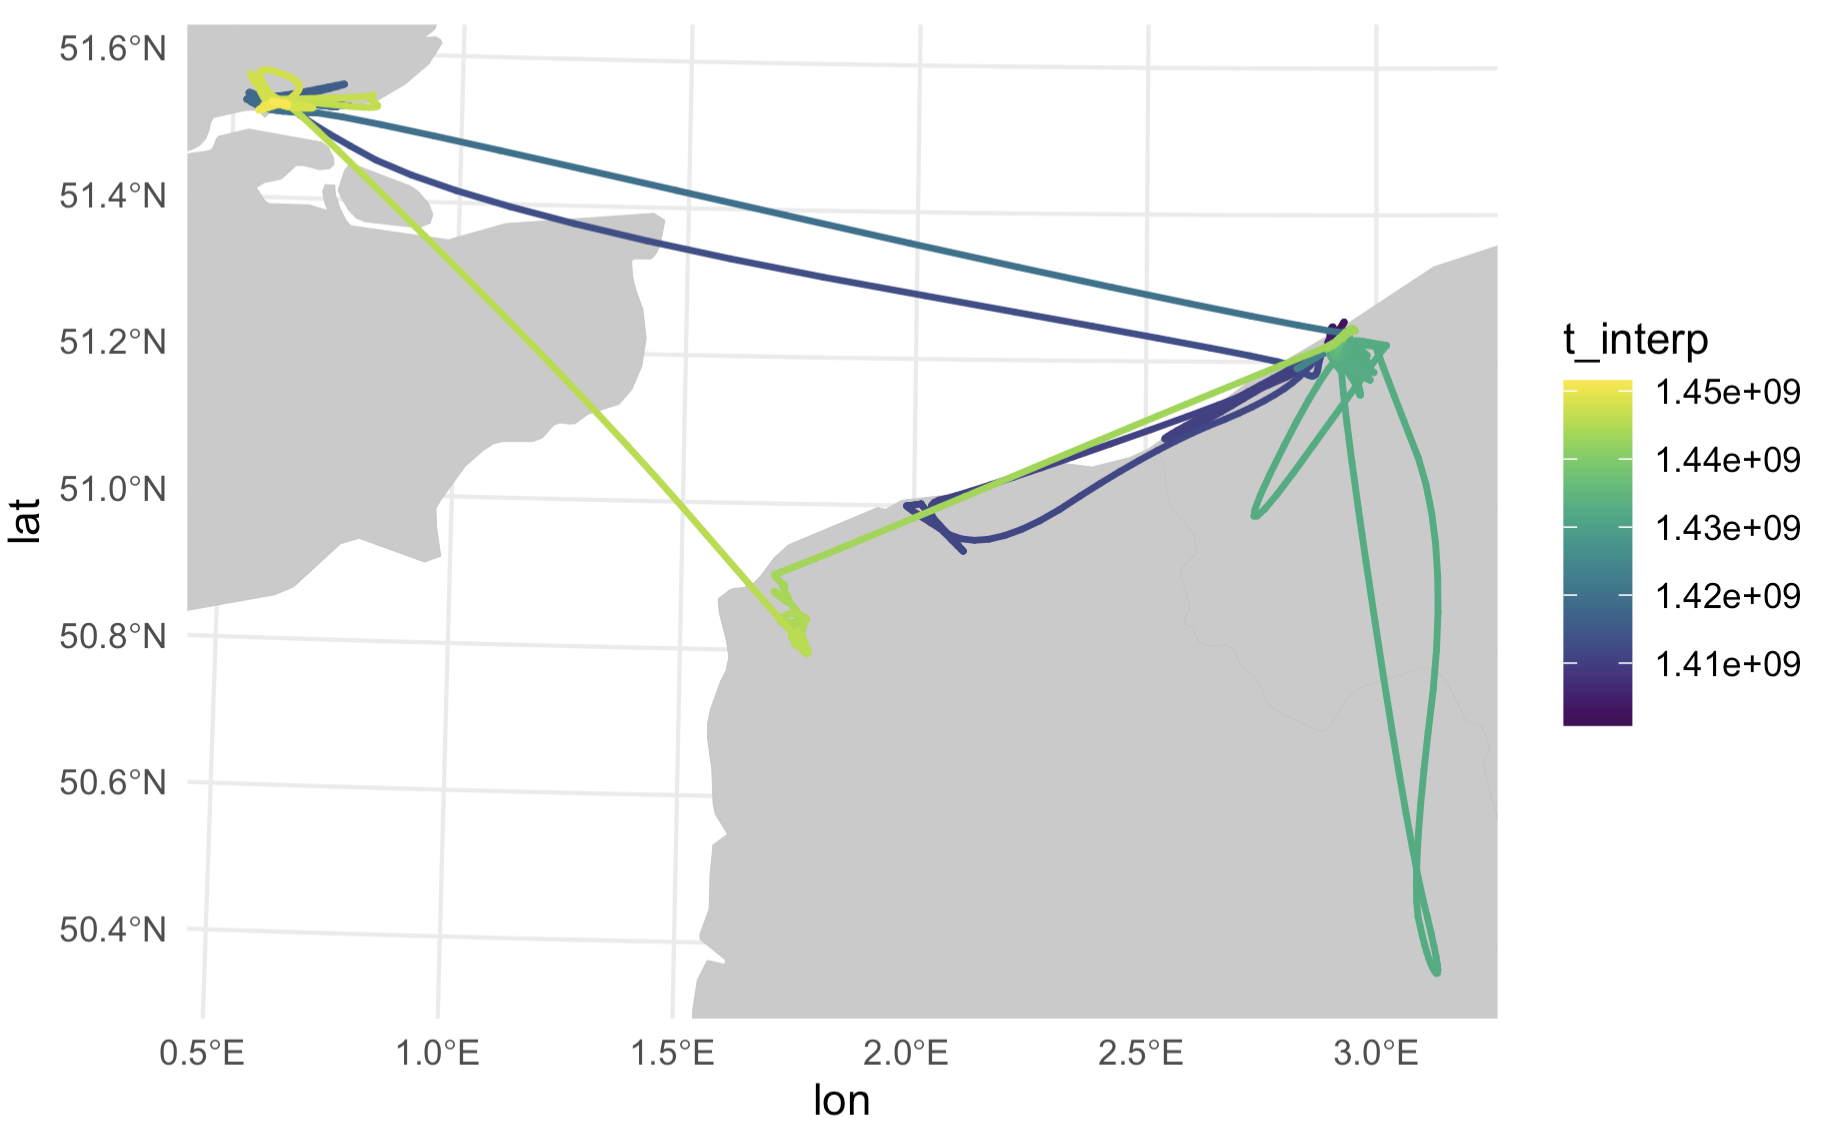 First round of mapping: we have a flight path colored by a temporal gradient!